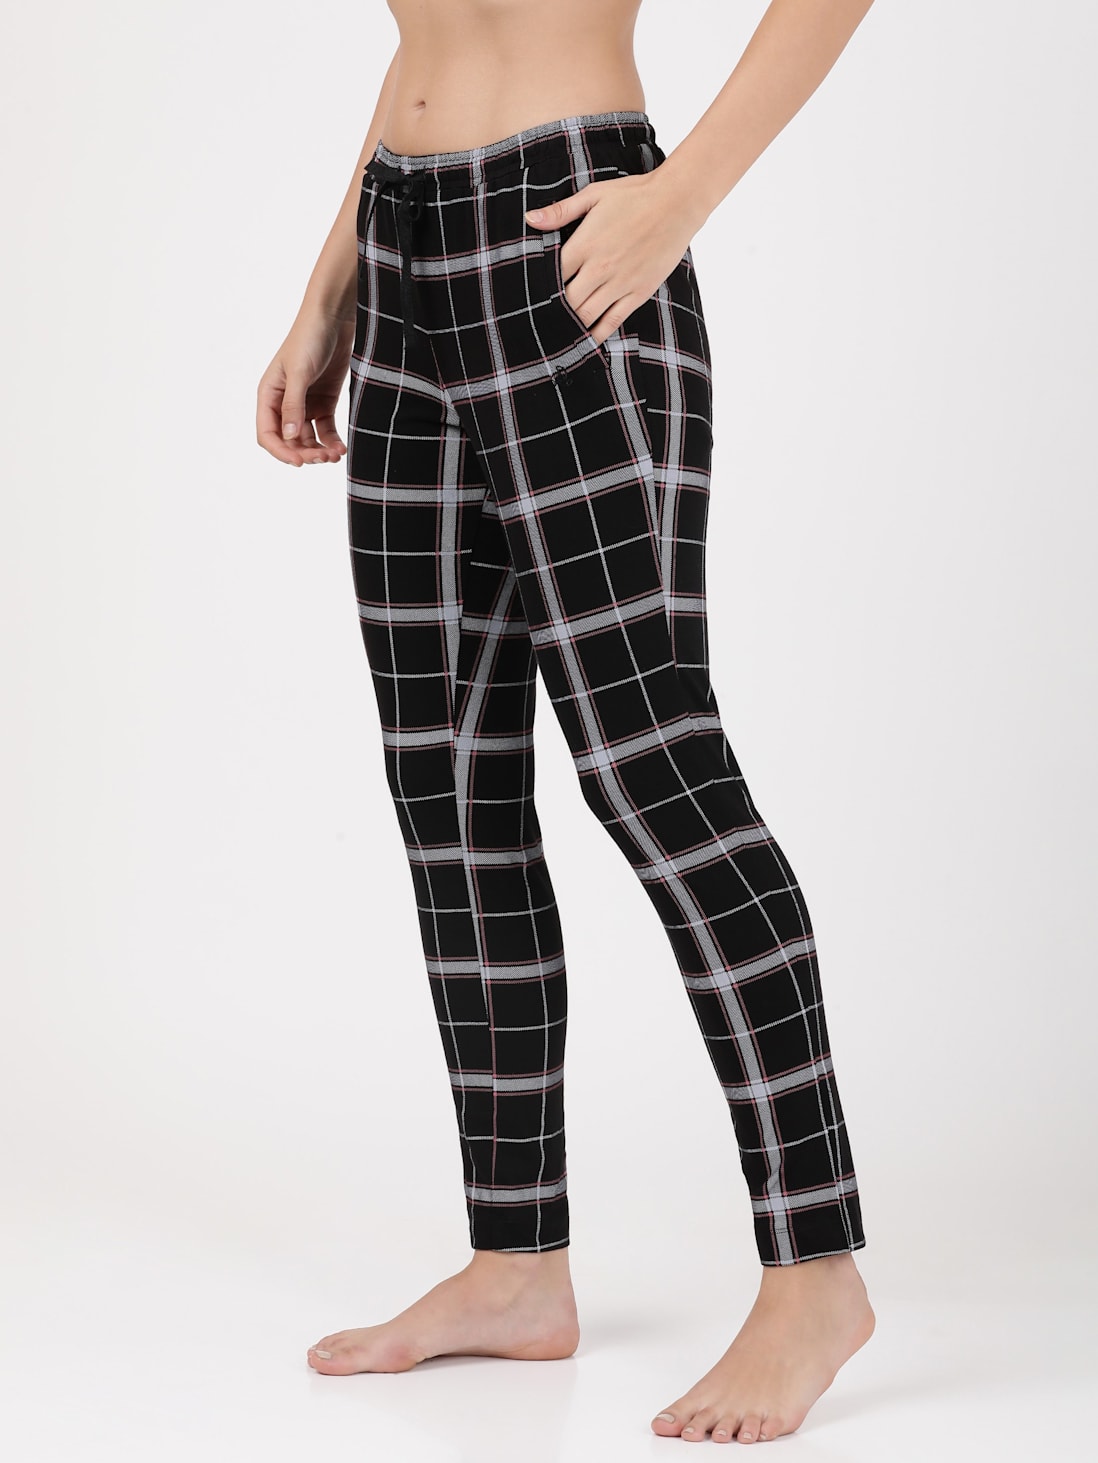 Buy Women's Super Combed Cotton Relaxed Fit Checkered Pyjama with Side ...